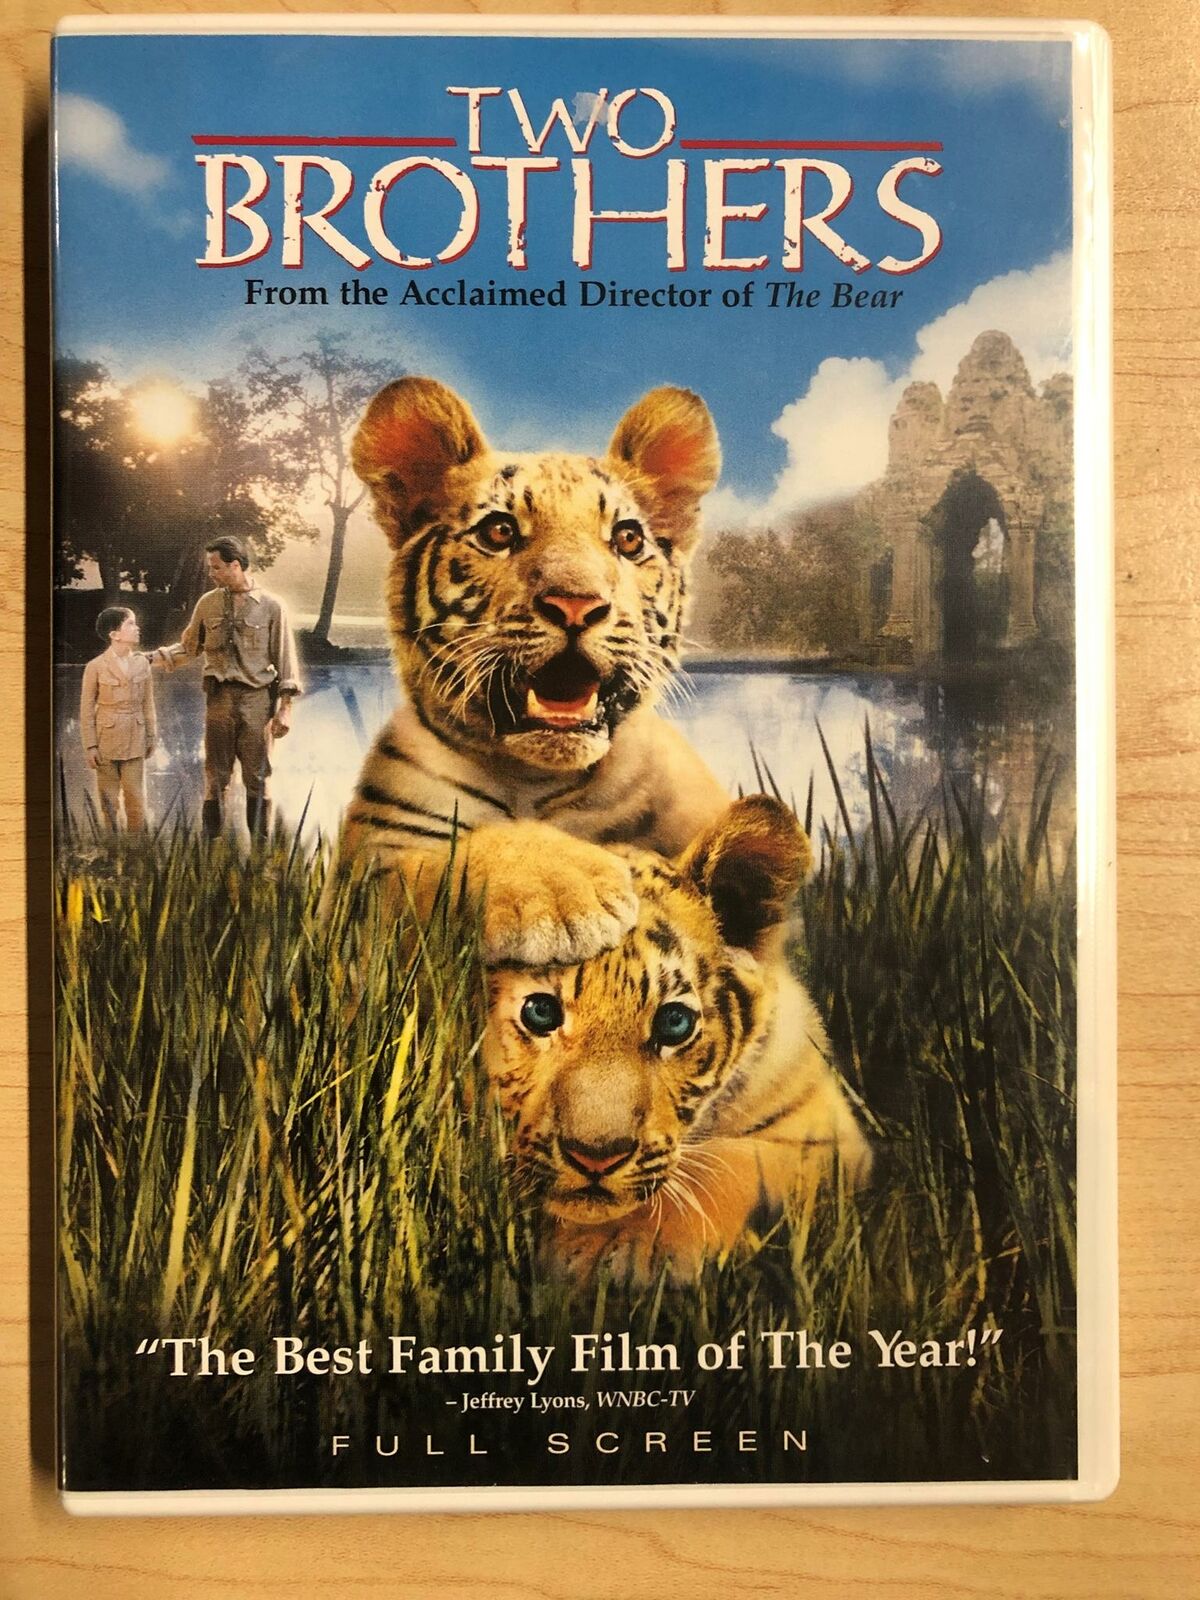 Two Brothers (DVD, 2004) - J1231